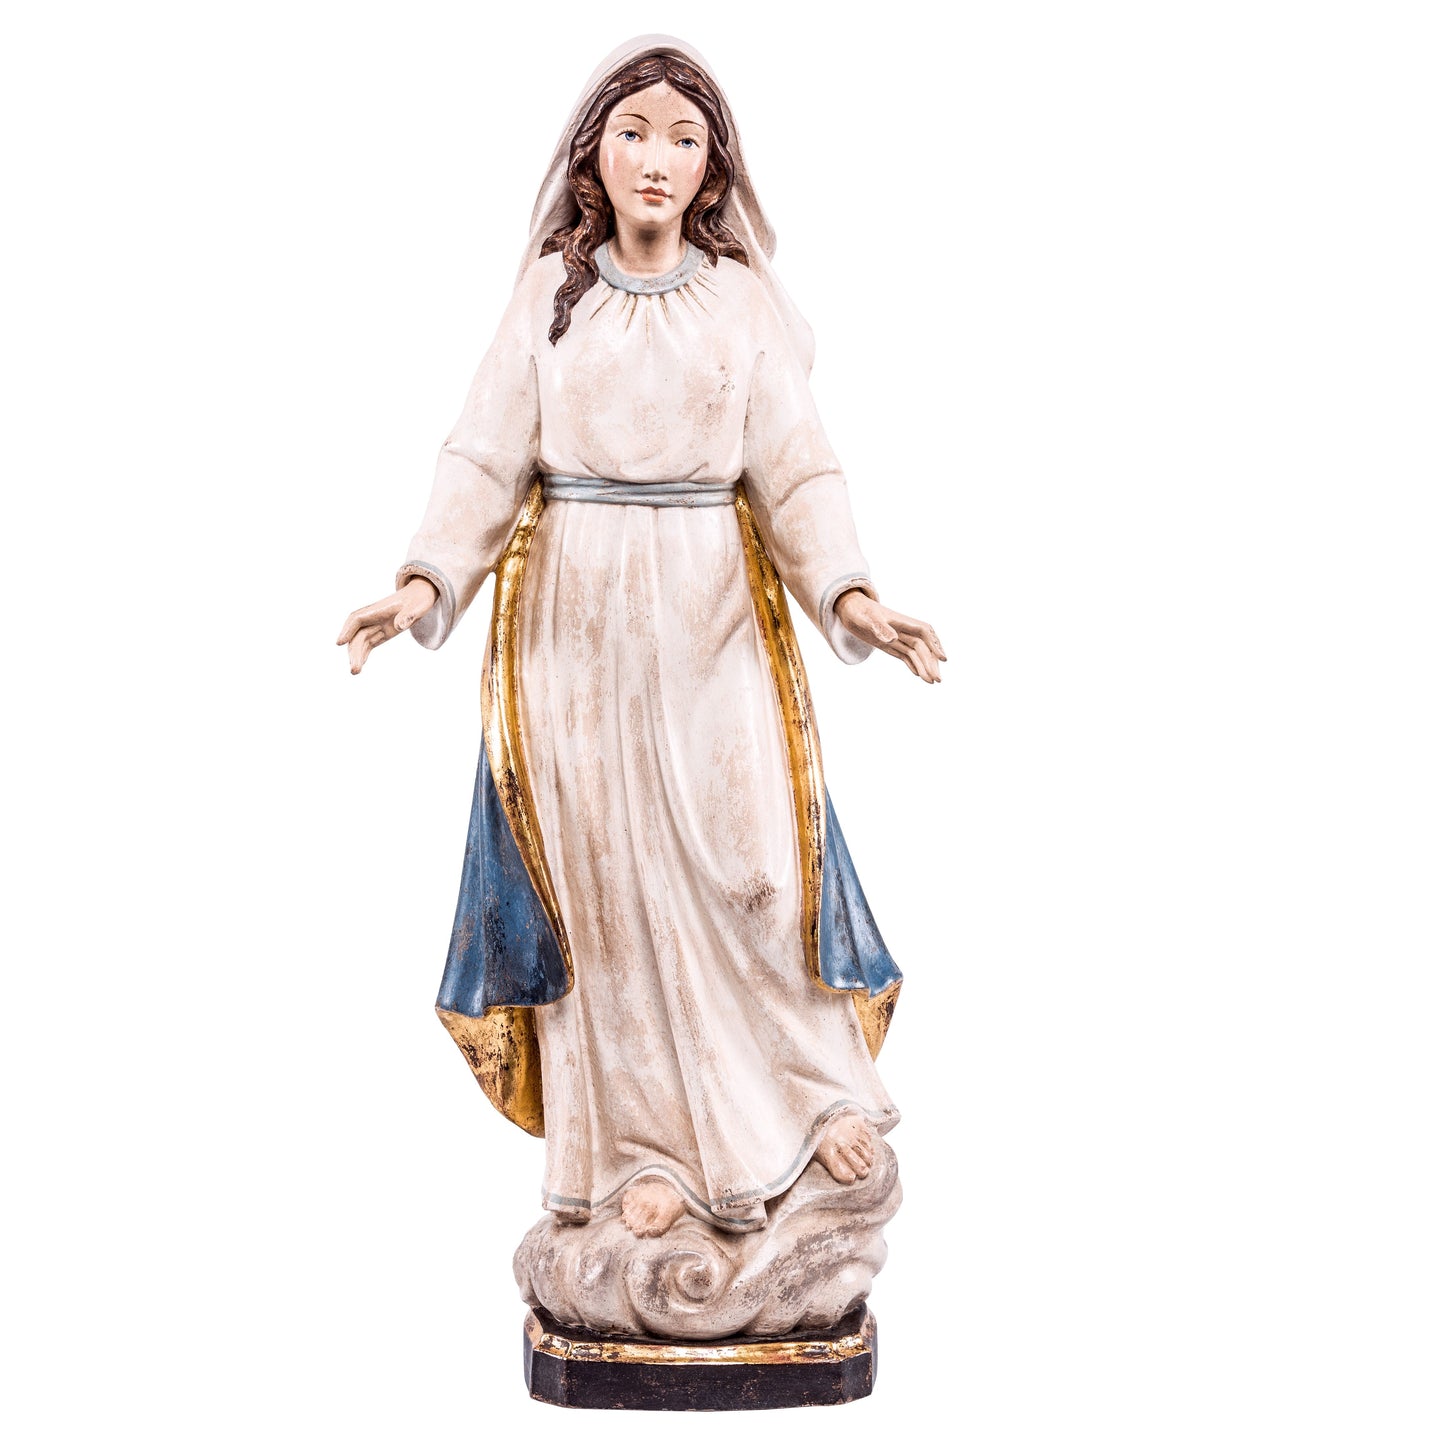 MONDO CATTOLICO Golden / 60 cm (23.6 in) Wooden statue of Our Lady of Grace